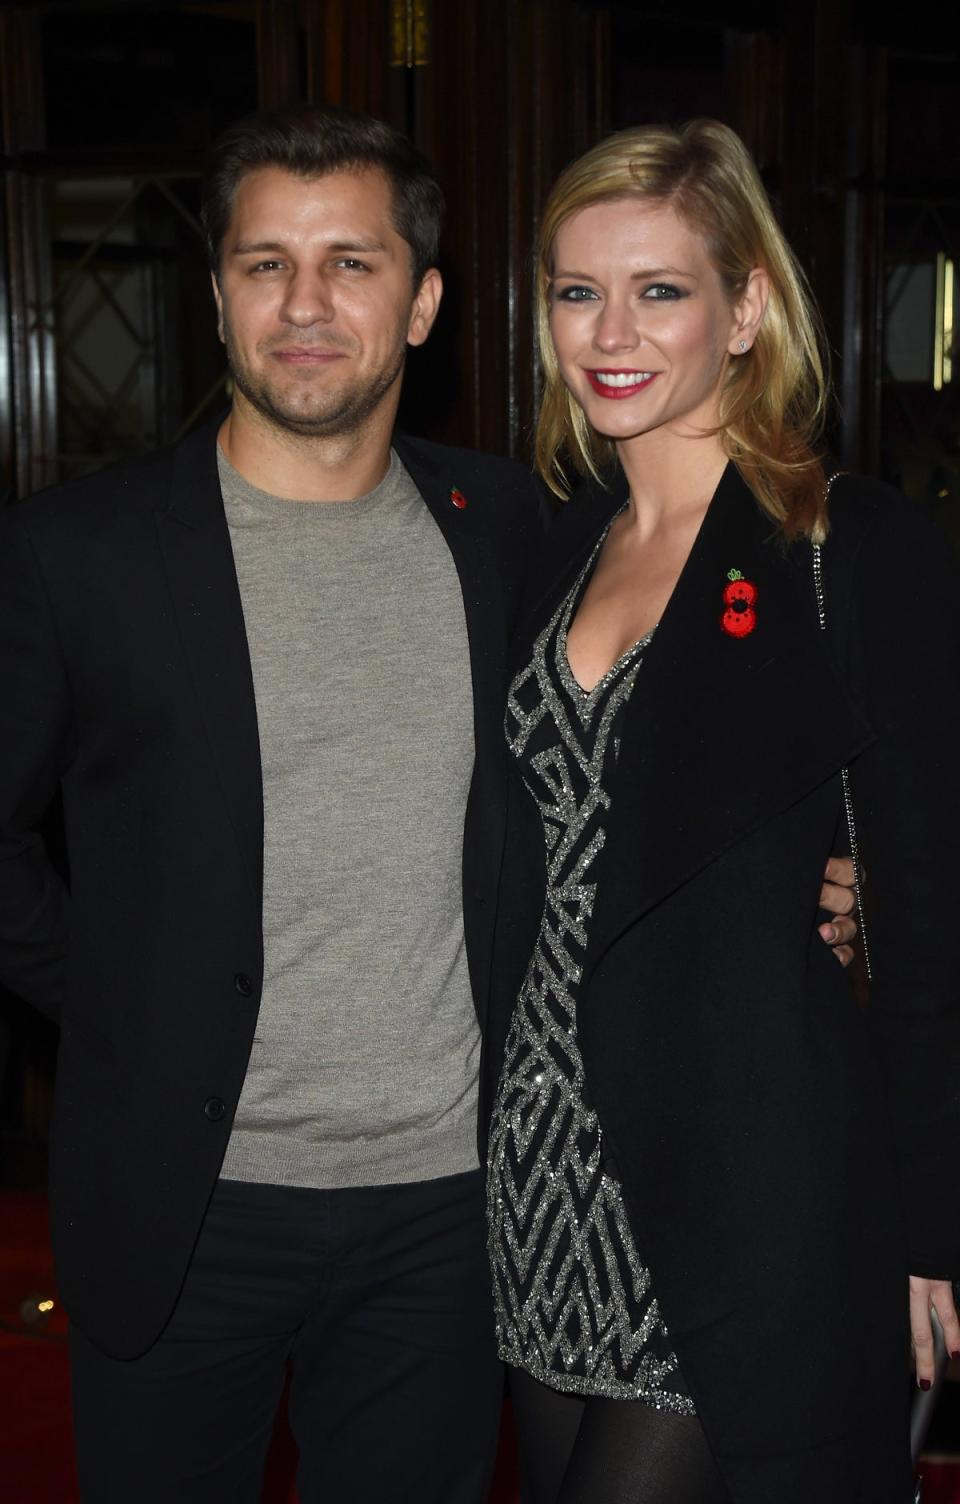 Rachel Riley and Pasha Kovalev (Getty Images)